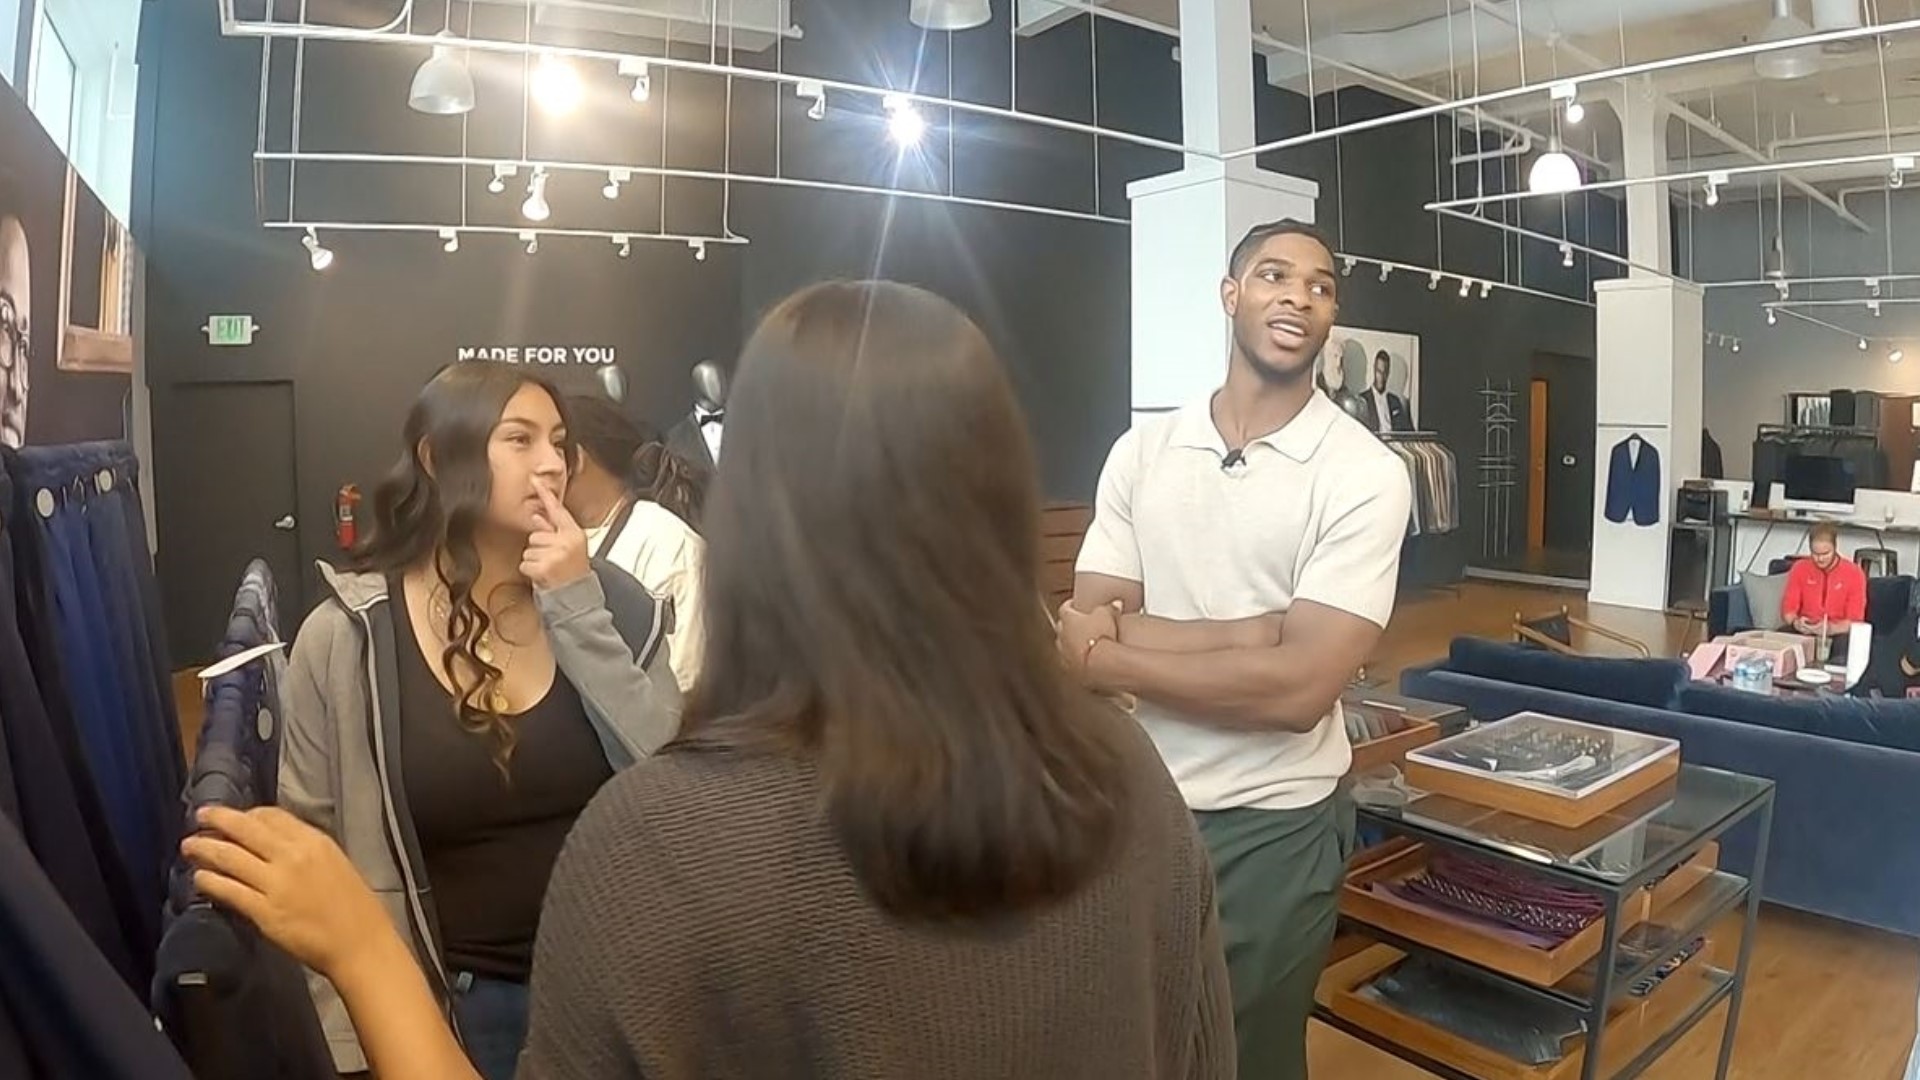 Portland Trail Blazers rookie Scoot Henderson hosted his first charity event in Portland at Indochino.